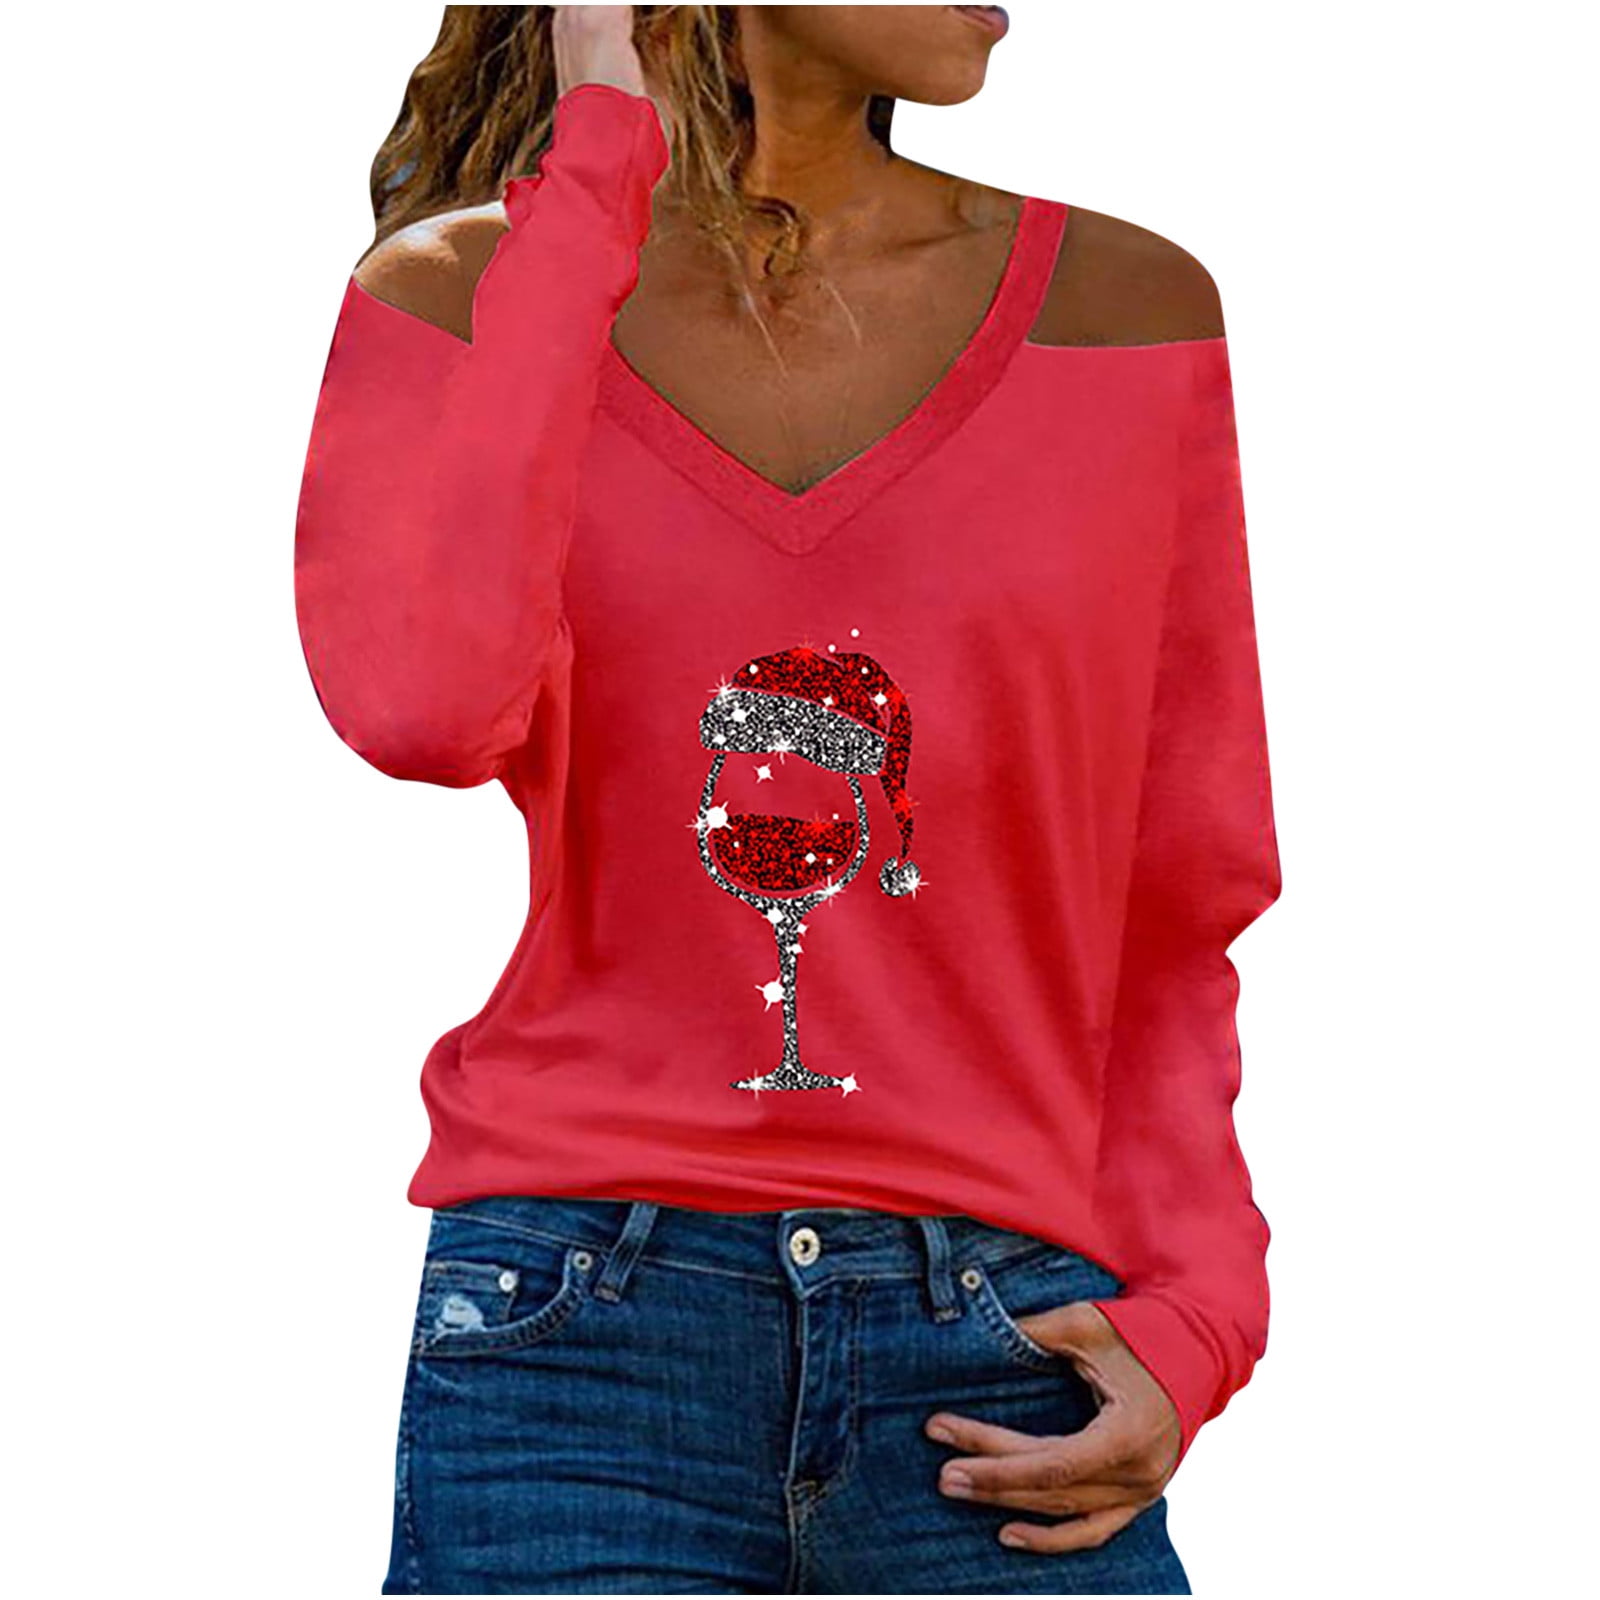 YYDGH Going Out Tops for Women V-Neck Long Sleeve T-Shirt Autumn